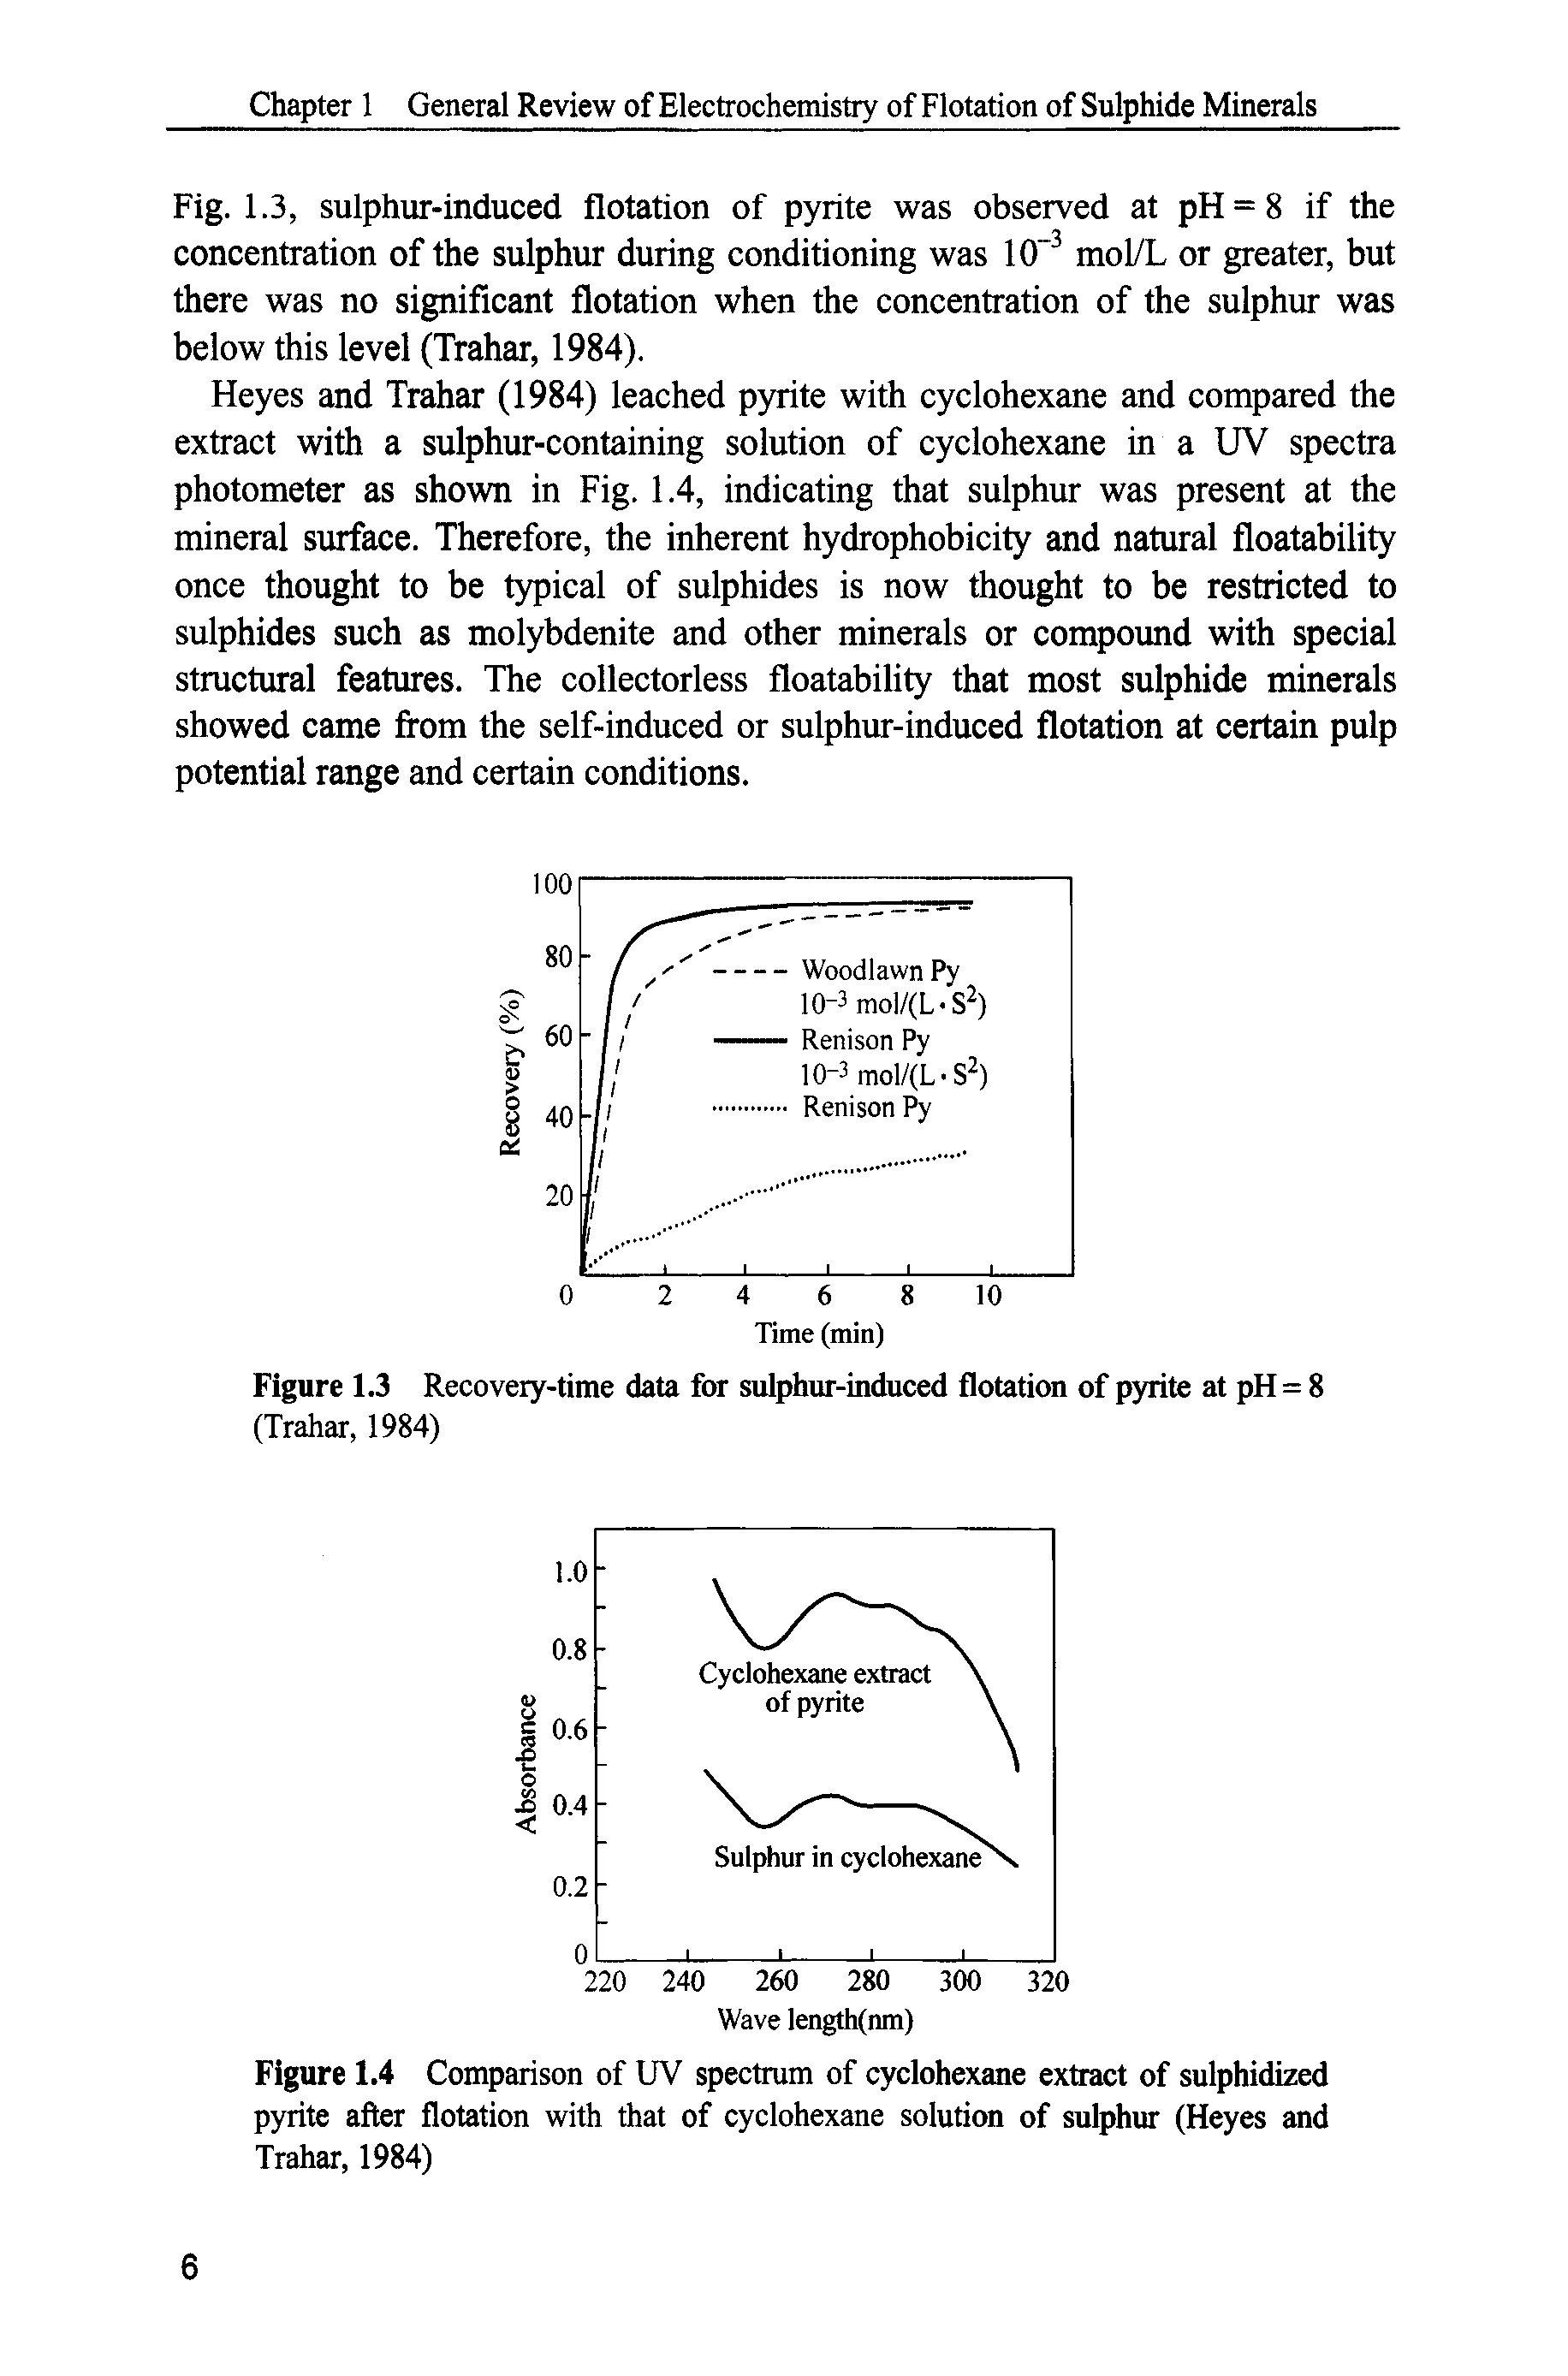 Figure 1.4 Comparison of UV spectrum of cyclohexane extract of sulphidized pyrite after flotation with that of cyclohexane solution of sulphur (Heyes and Trahar, 1984)...